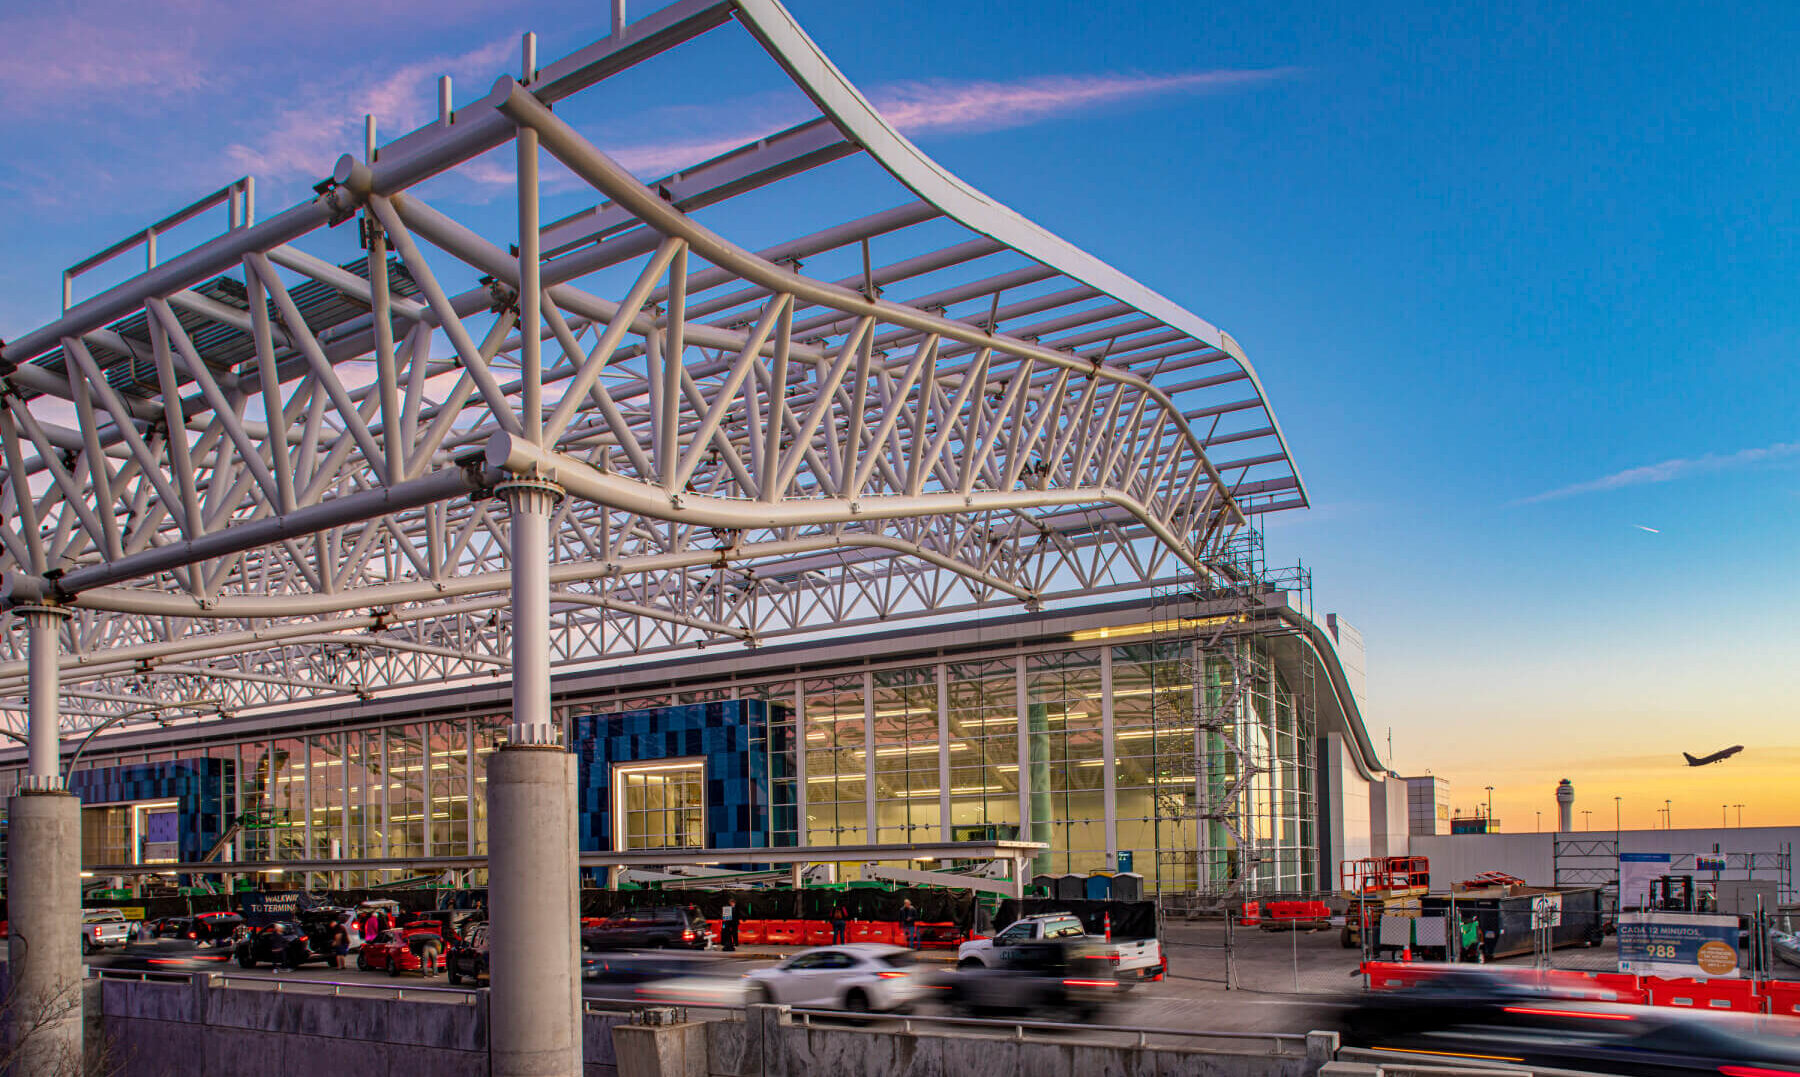 the steel canopy over the curbside outside the Charlotte Douglas International Airport terminal during the daytime